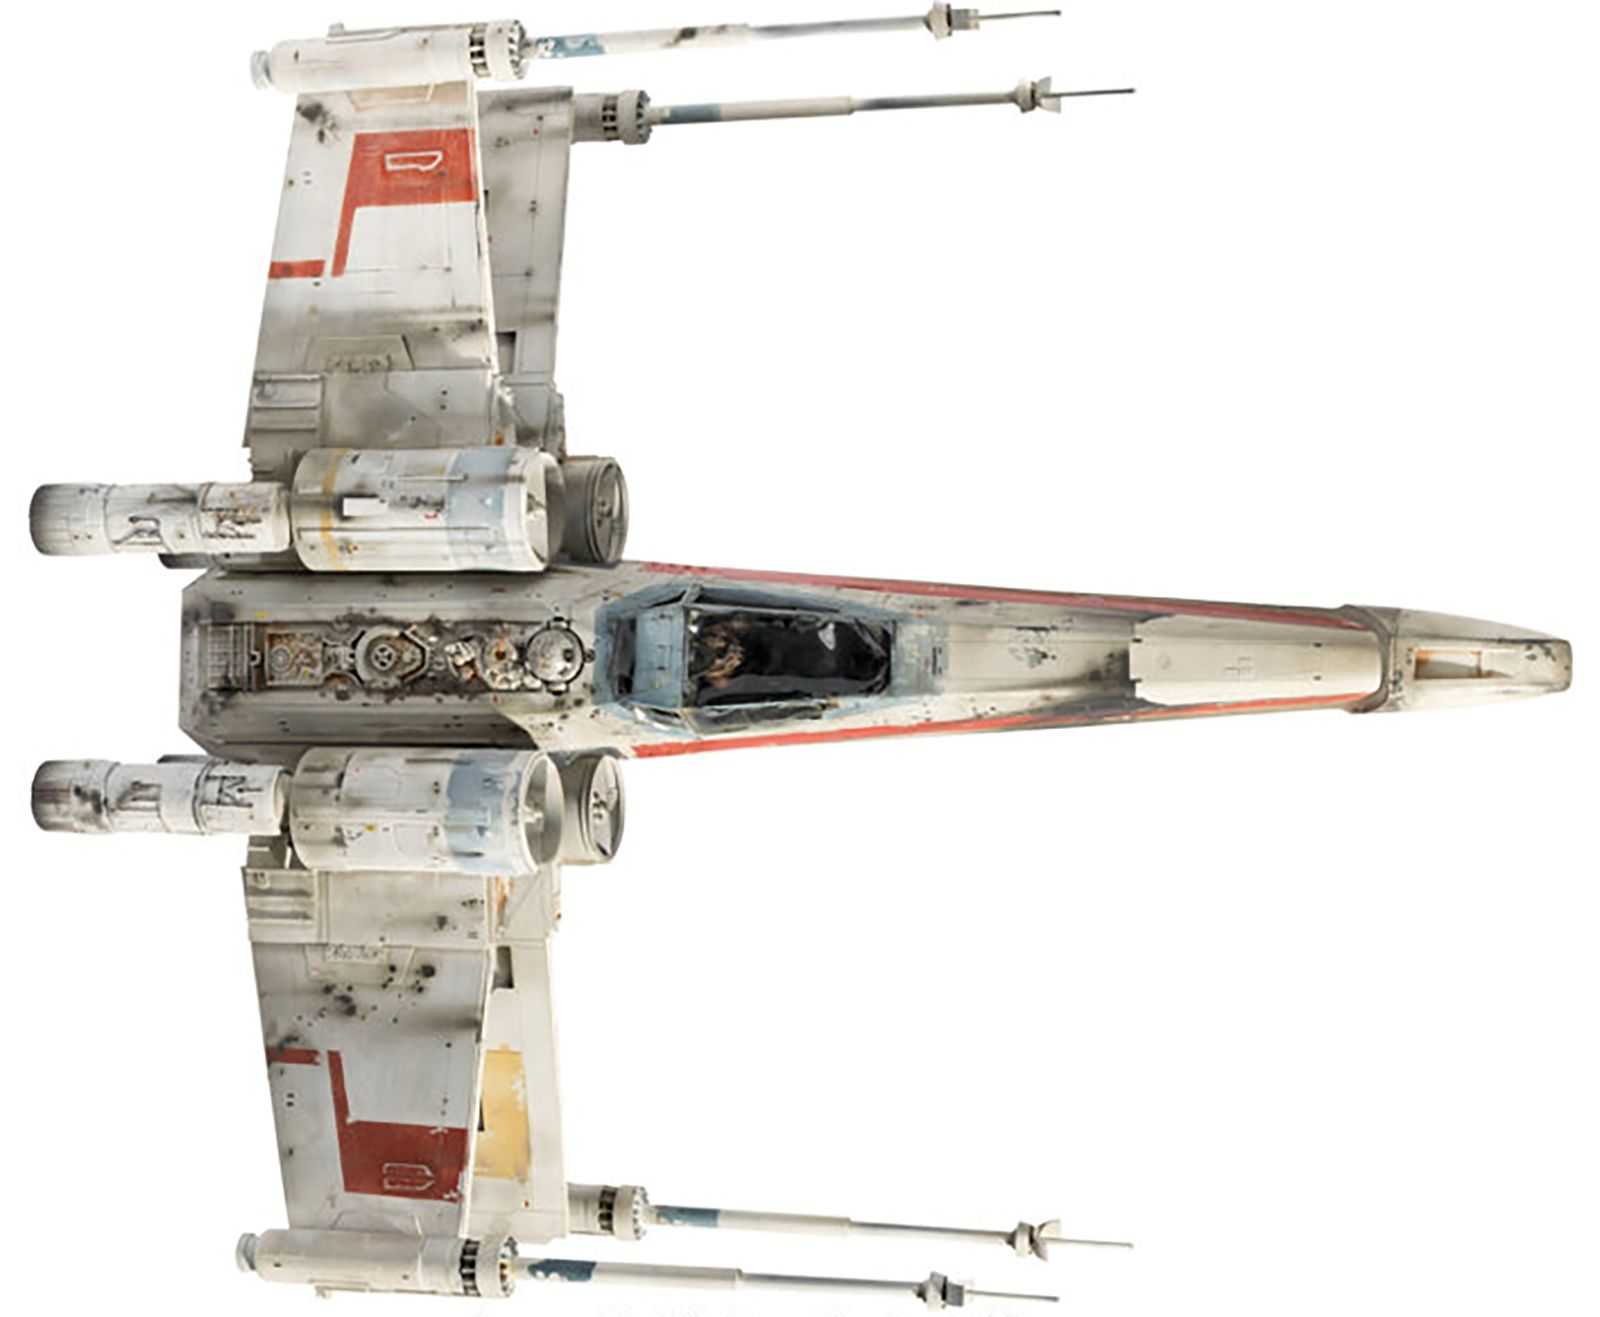 Long-lost 'Star Wars' X-wing model fetches over $3.1 million at